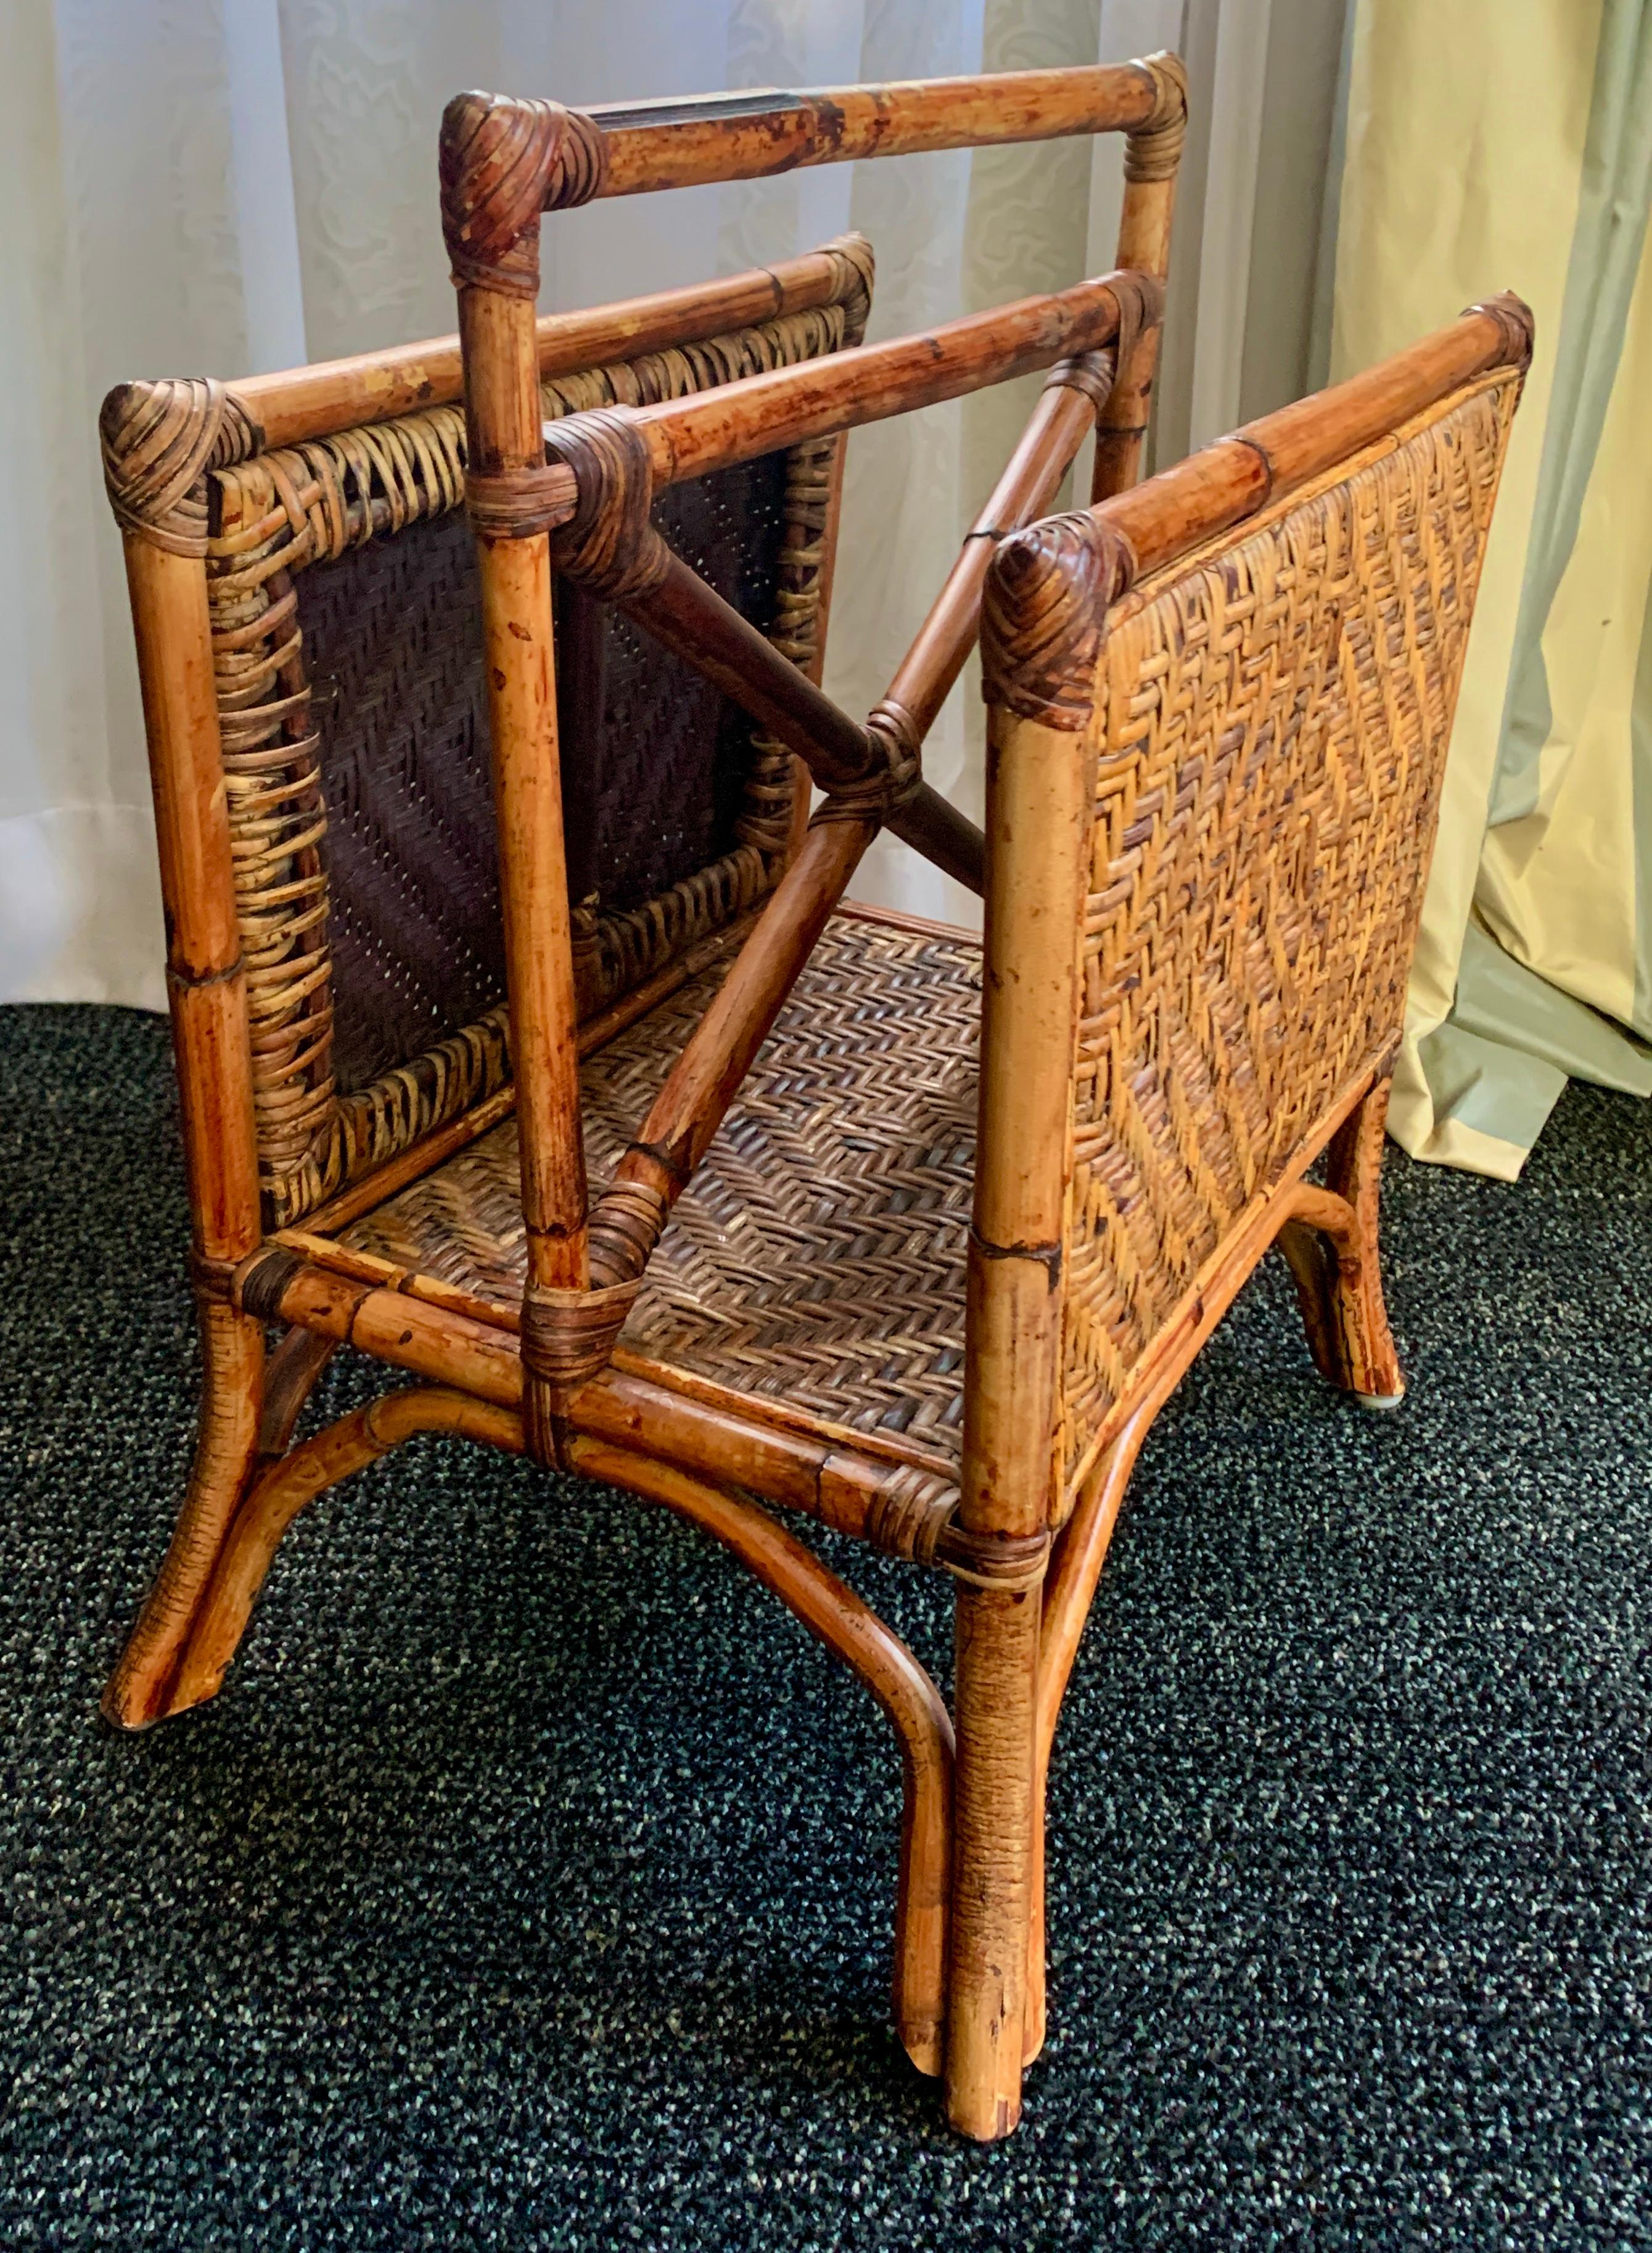 Rattan two section magazine rack. The construction and design are very nice, with a woven raffia/cane insert. The rack has two sides and designed in a way that create a handle for easy mobility. A vintage piece in wonderful condition. A compliment